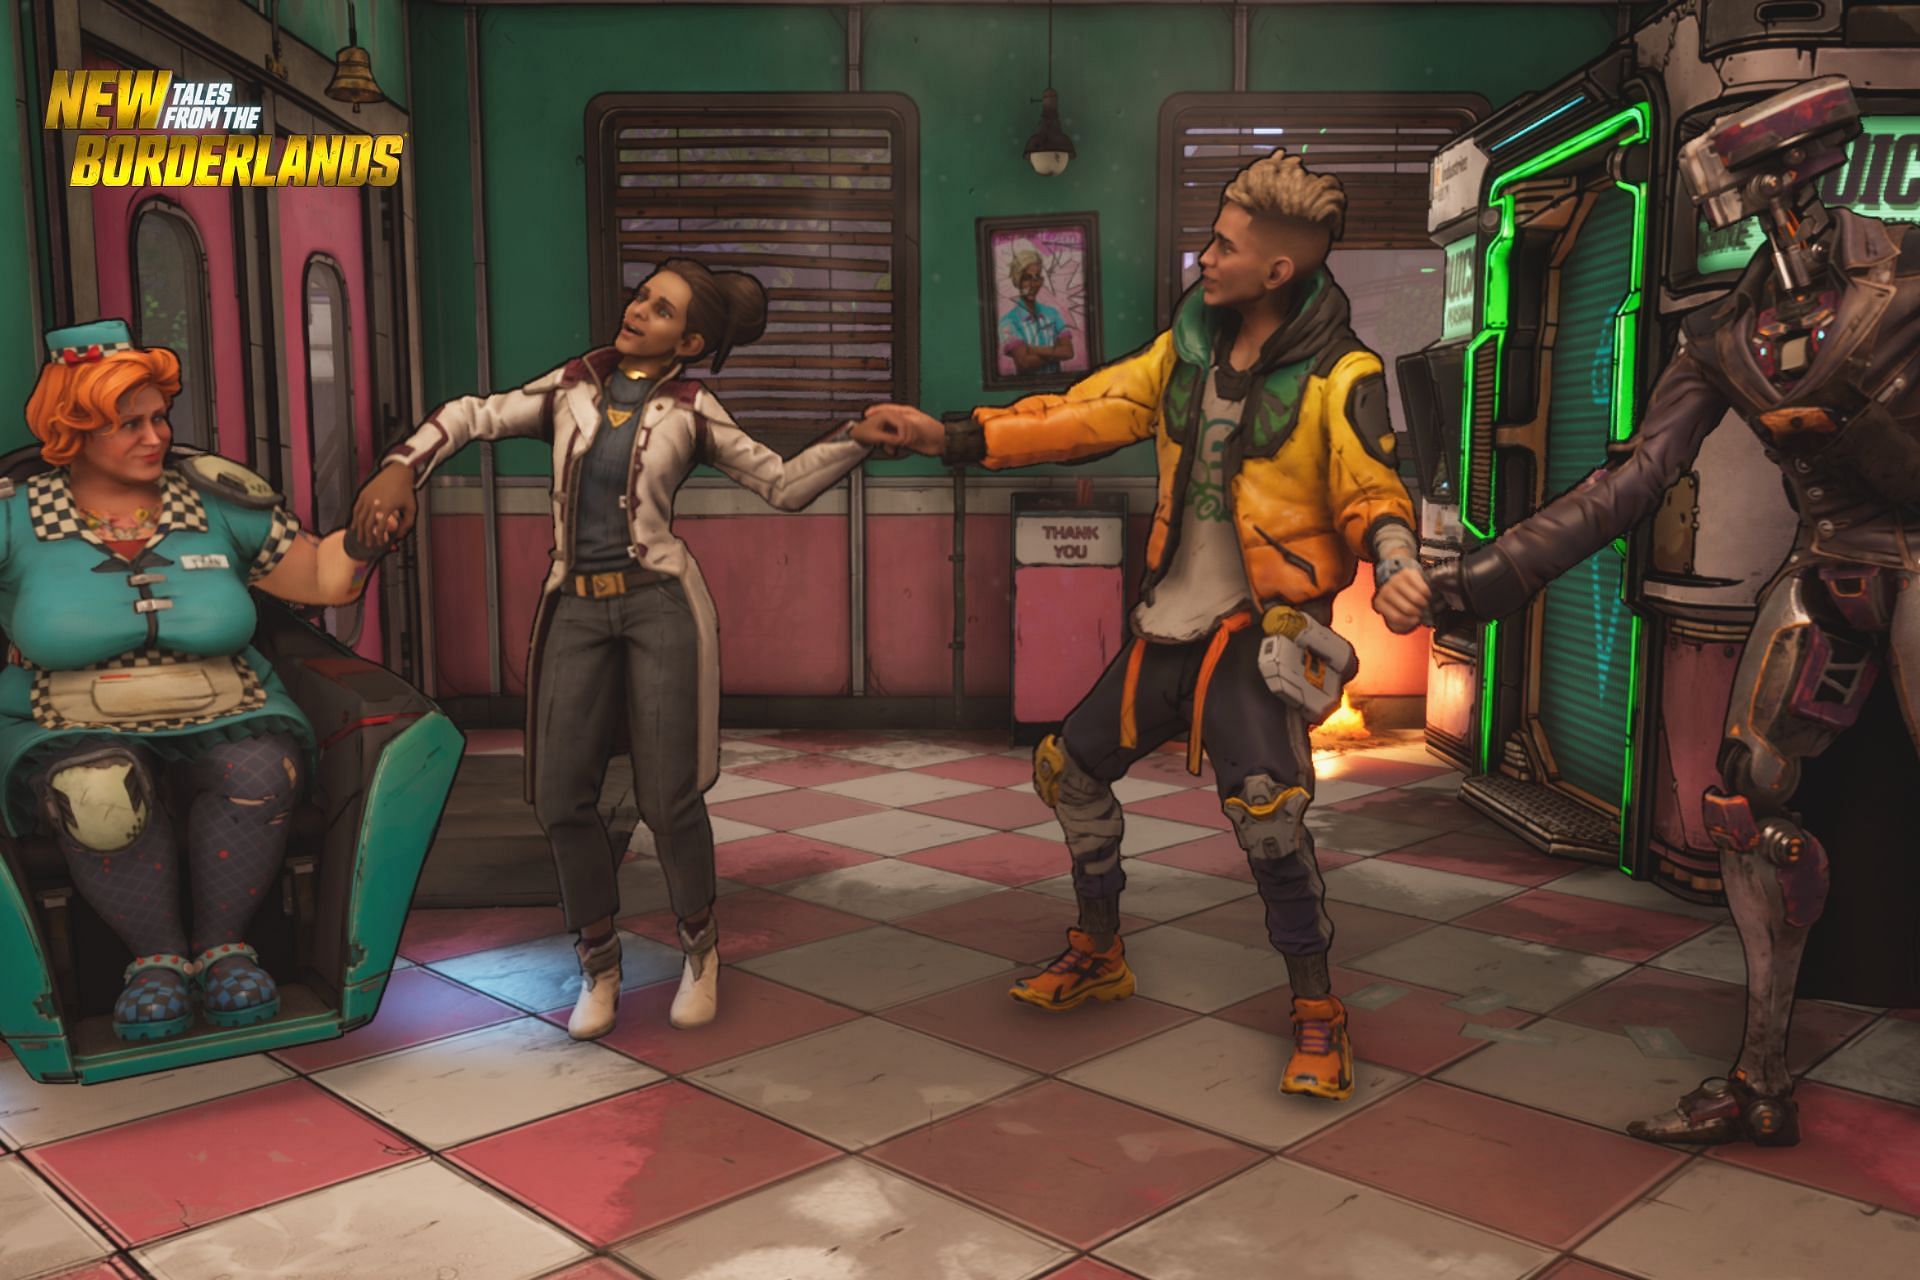 (Image via 2K/New Tales from the Borderlands